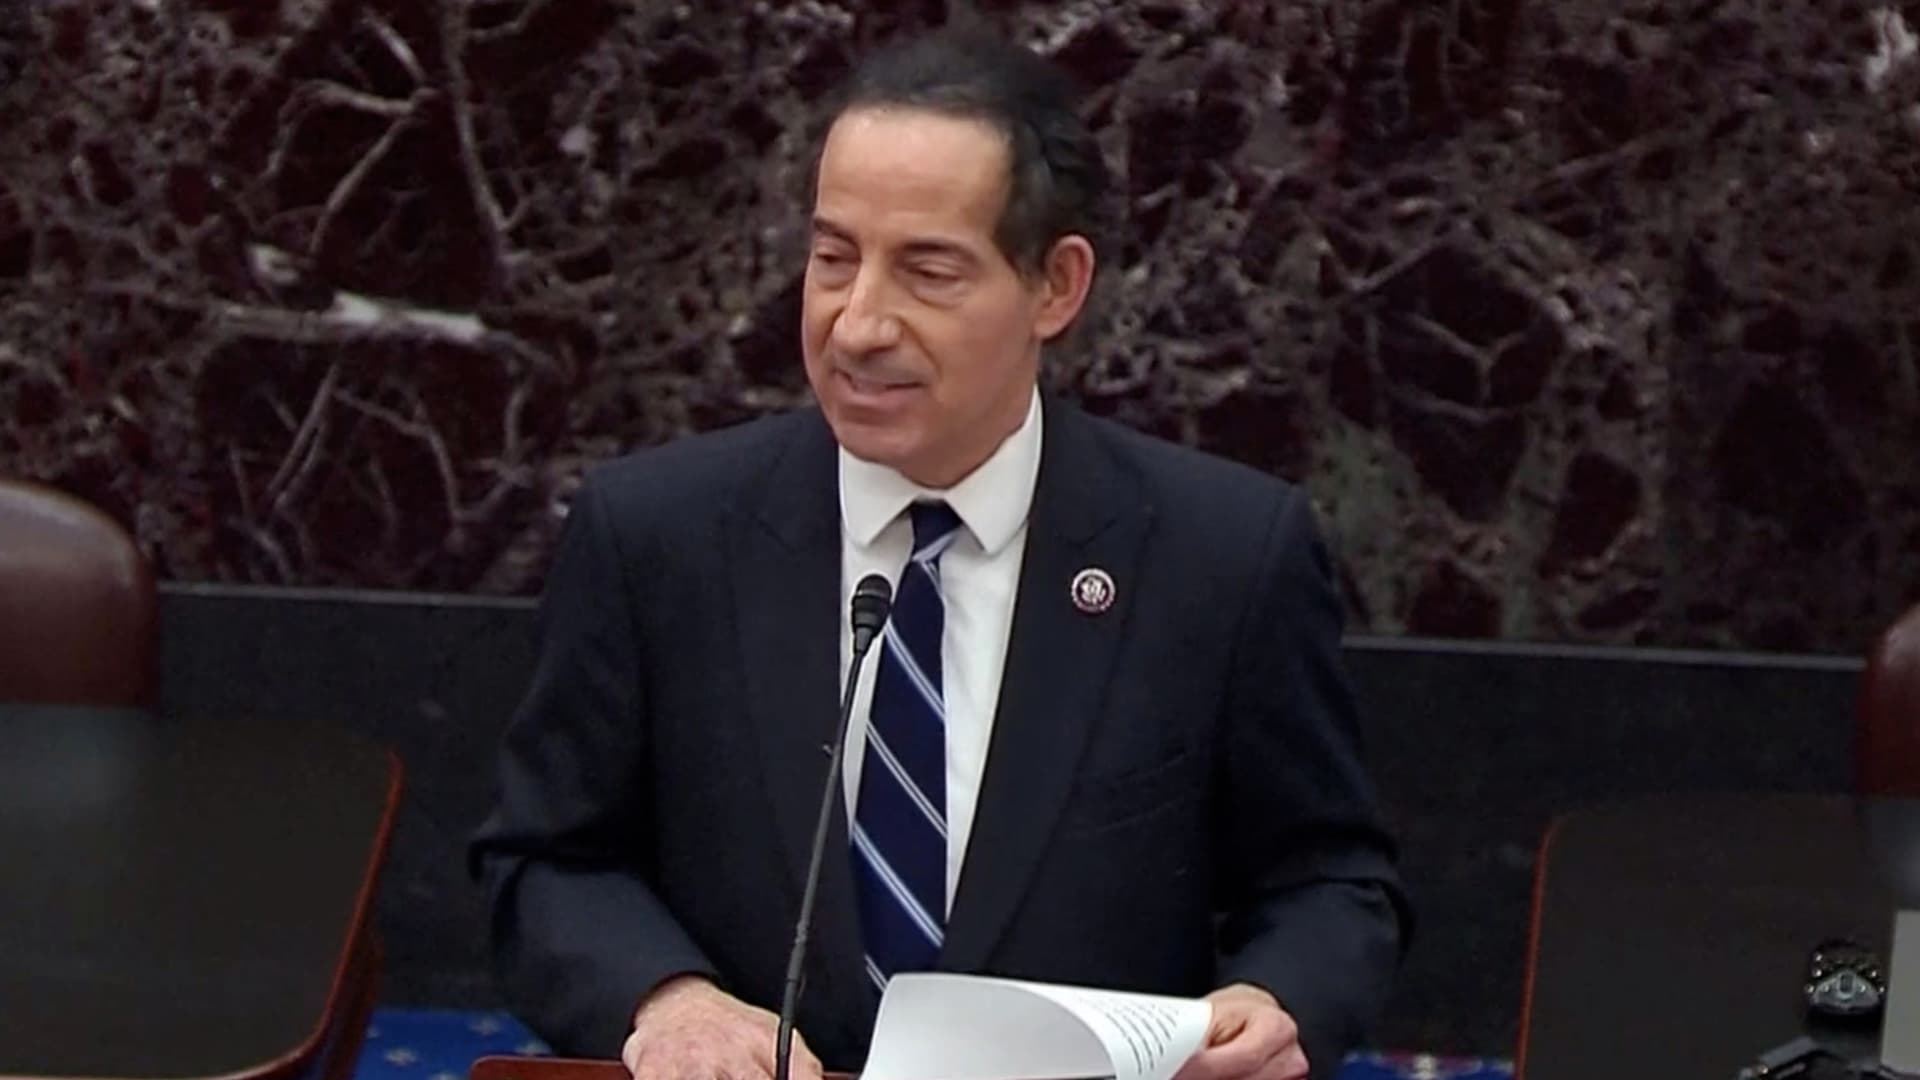 House lead impeachment manager Jamie Raskin (D-MD) reads the House article of impeachment against former President Donald Trump on accusations of inciting the January 6 attack on the Capitol, on the floor of the U.S. Senate in this frame grab from video shot at the U.S. Capitol in Washington, U.S., January 25, 2021.